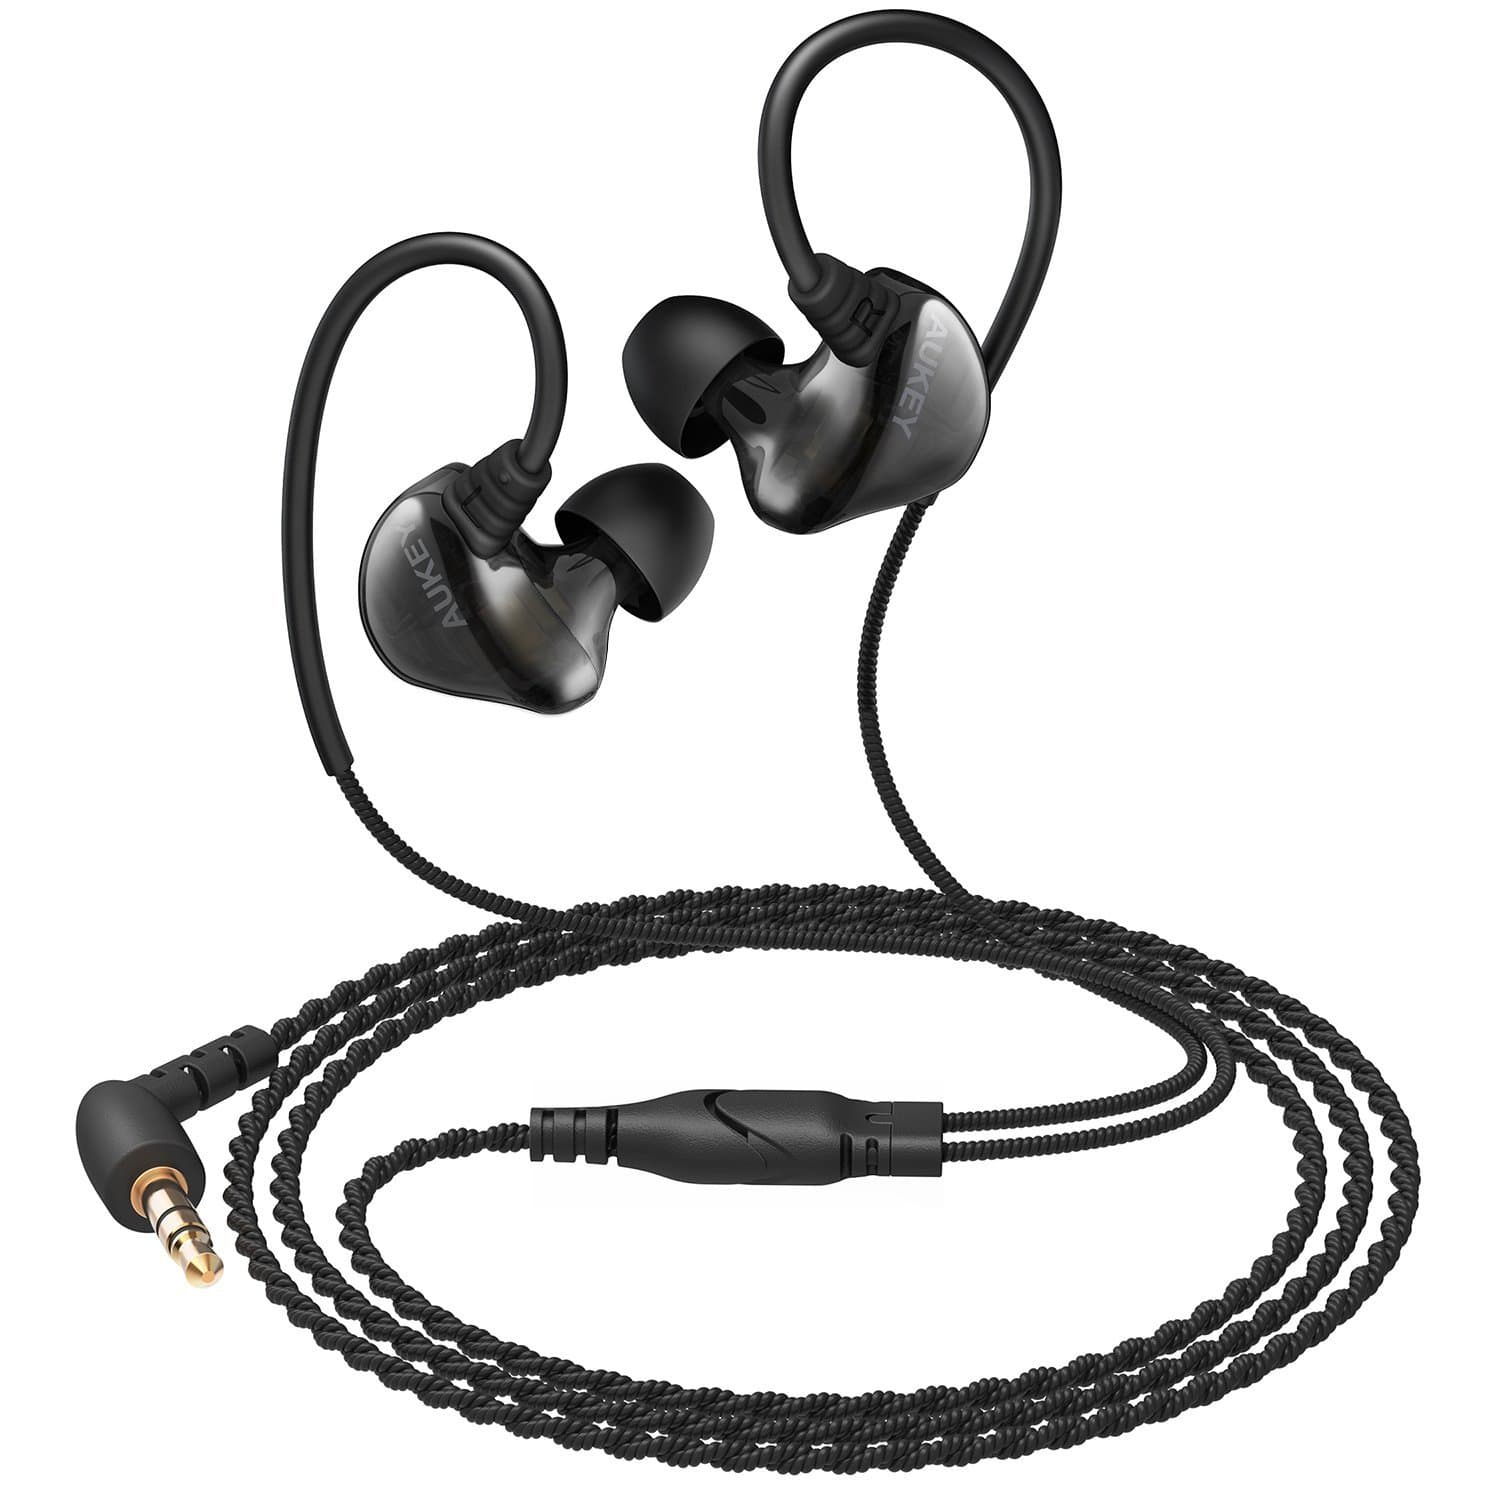 AUKEY EP-C3 Loops Wired In-Ear Earbuds Headphones with 3.5 mm Audio Output - Aukey Malaysia Official Store